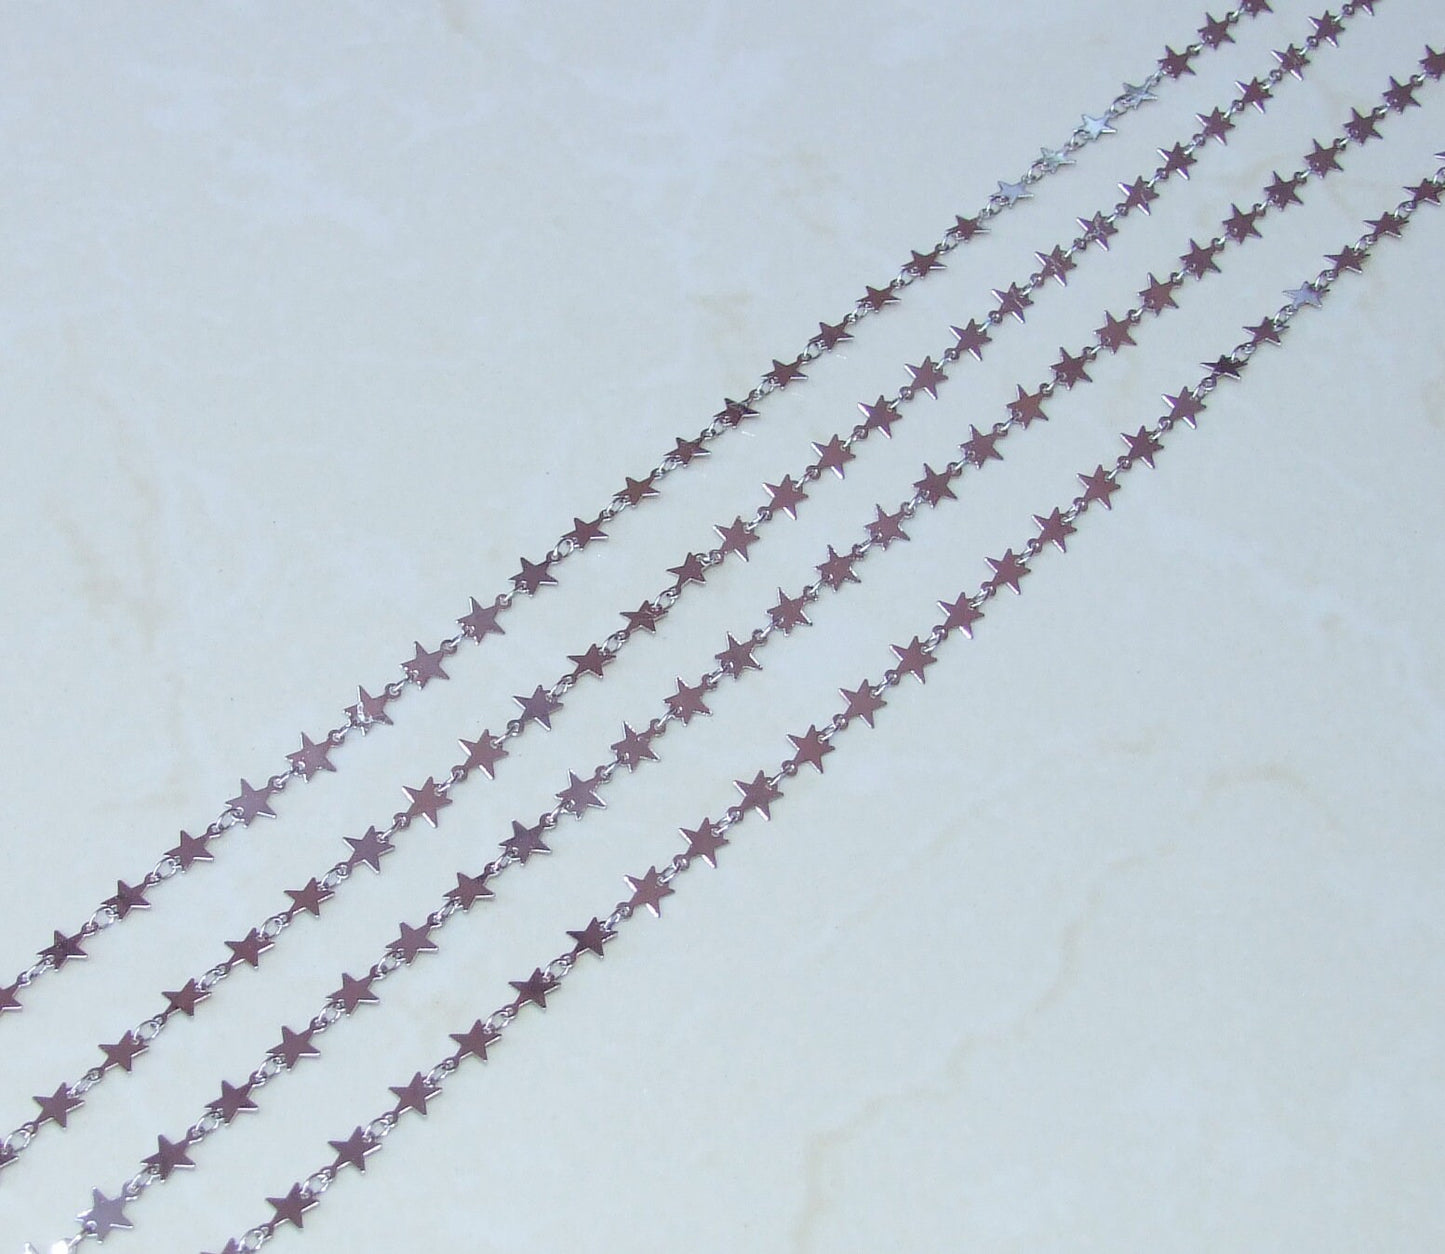 Silver Star Shaped Chain, Necklace Chain, Bulk Chain, Jewelry Making, Body Chain, Belly Chain, By the Foot, 6.5mm x .3mm